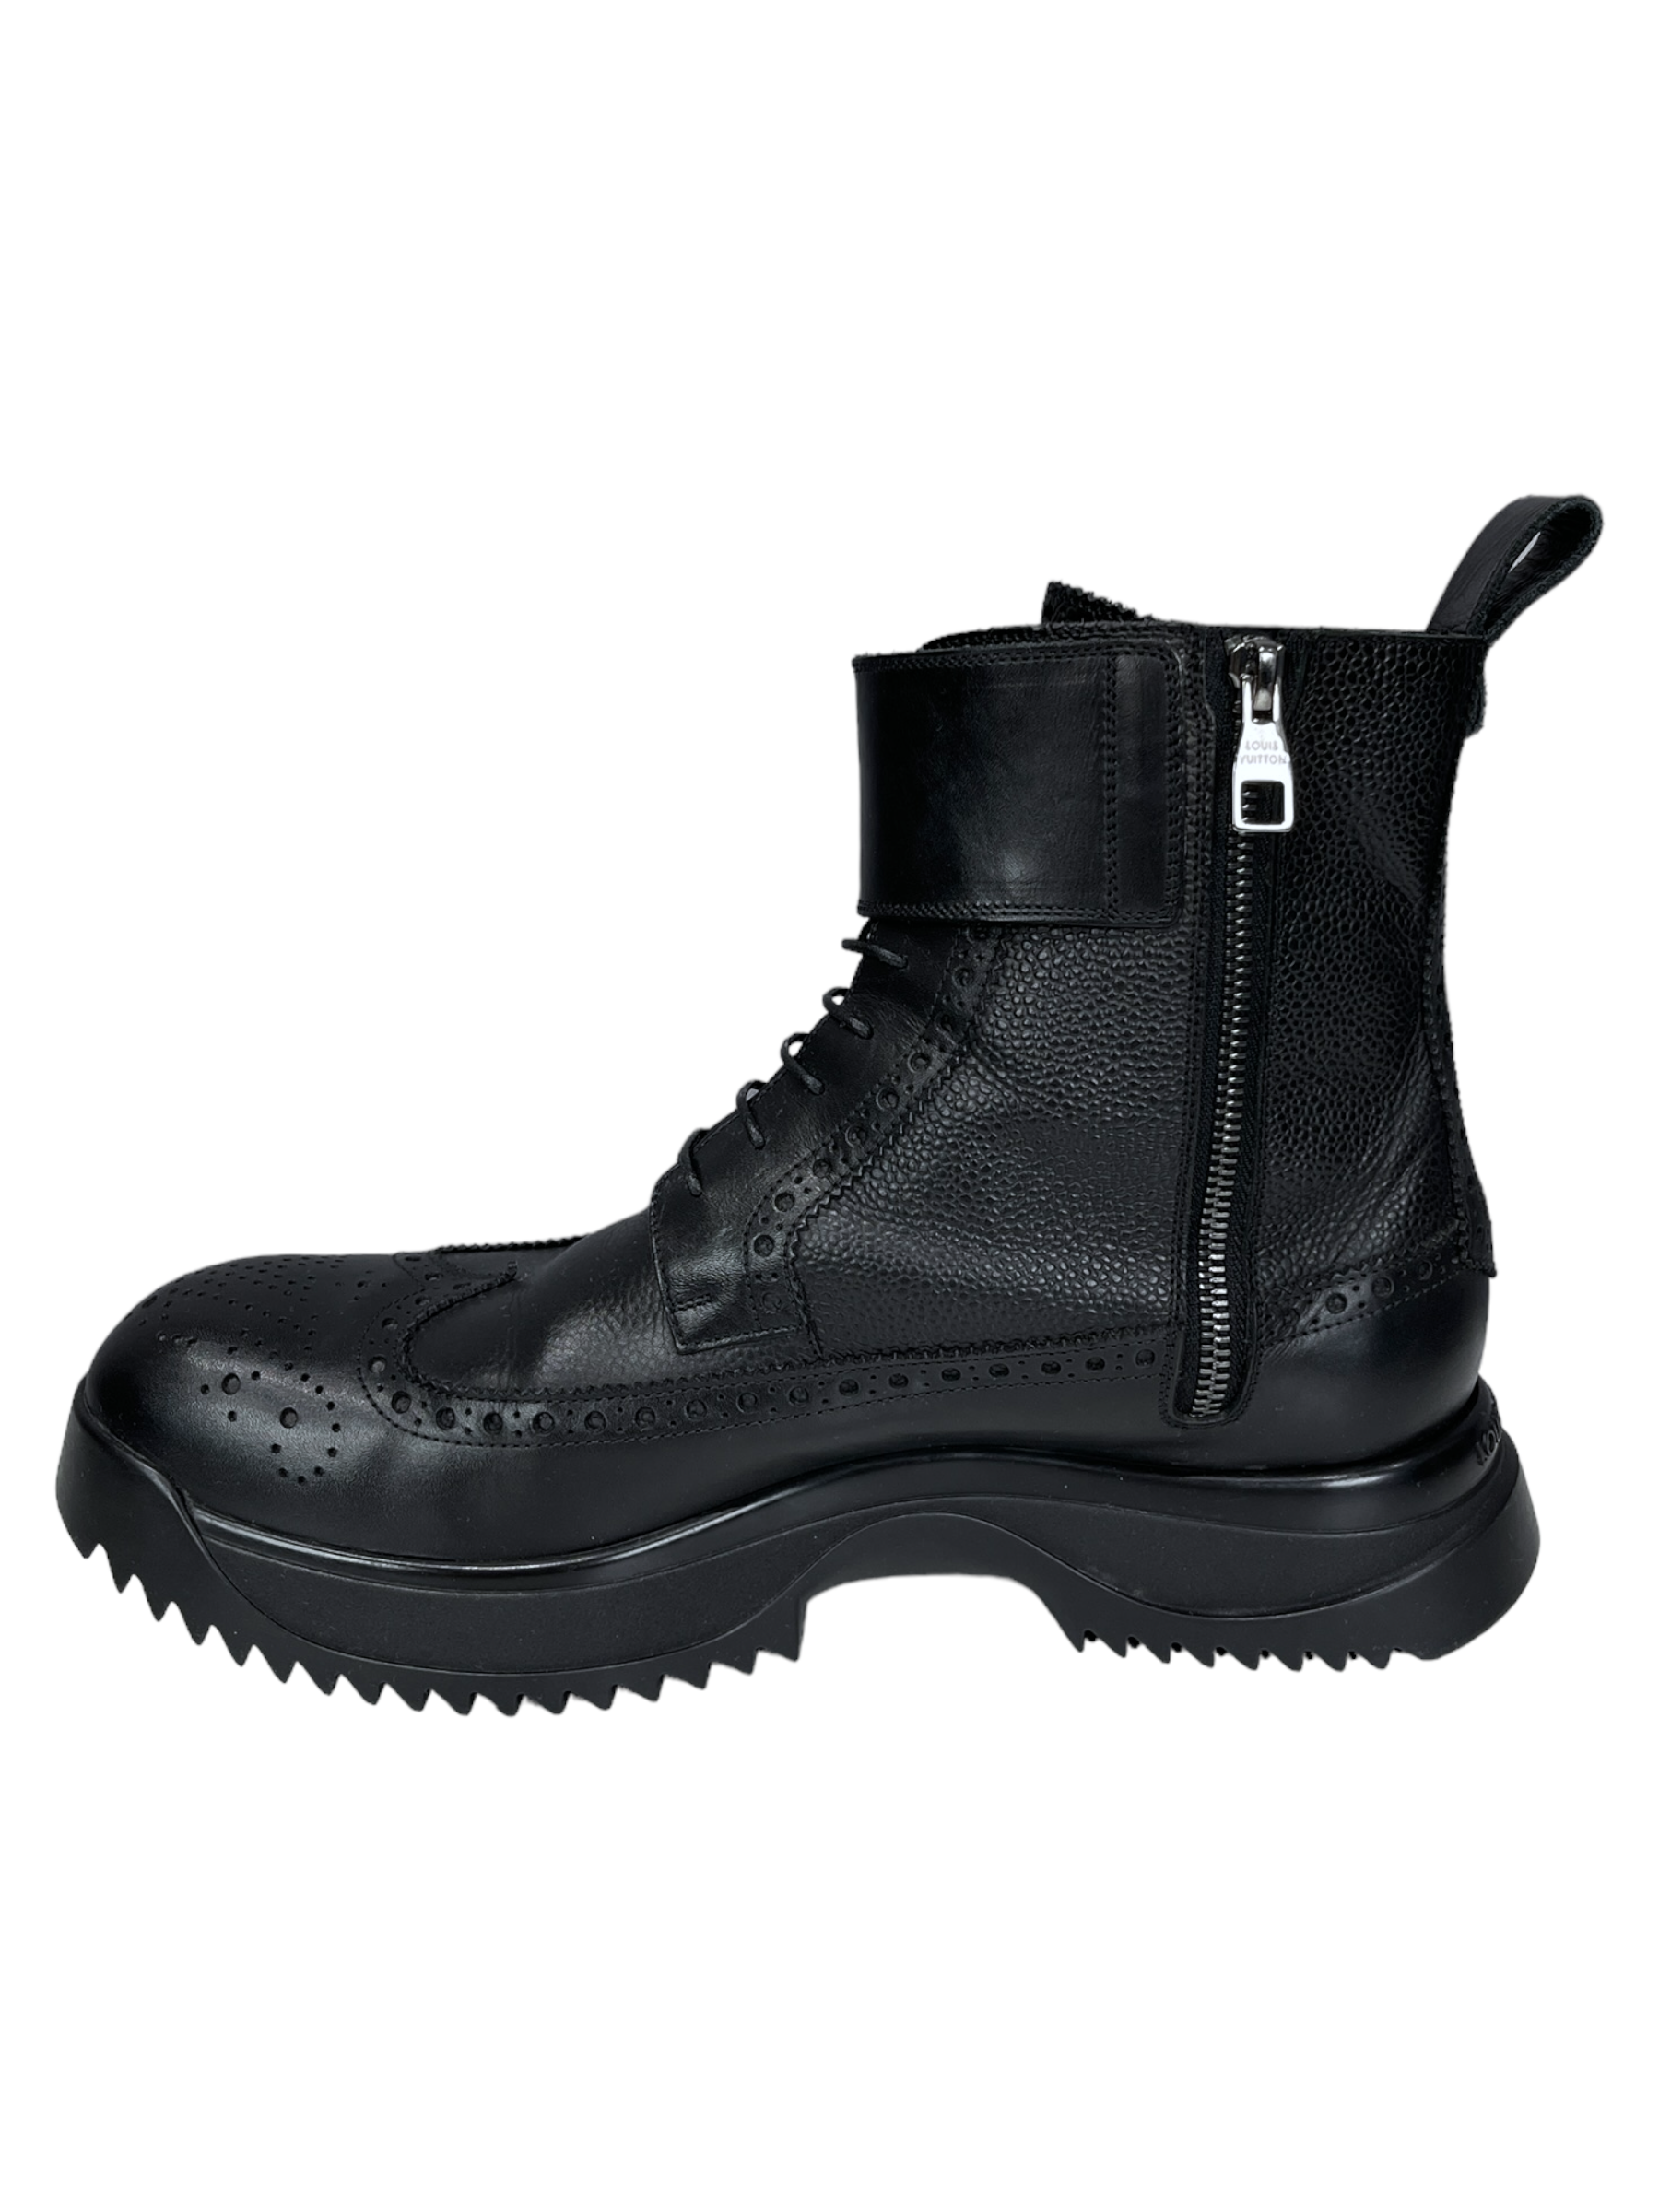 Louis Vuitton Black High Platform Military Style Boot 7.5 US- Genuine Design Luxury Consignment Calgary, Alberta, Canada New and Pre-Owned Clothing, Shoes, Accessories.